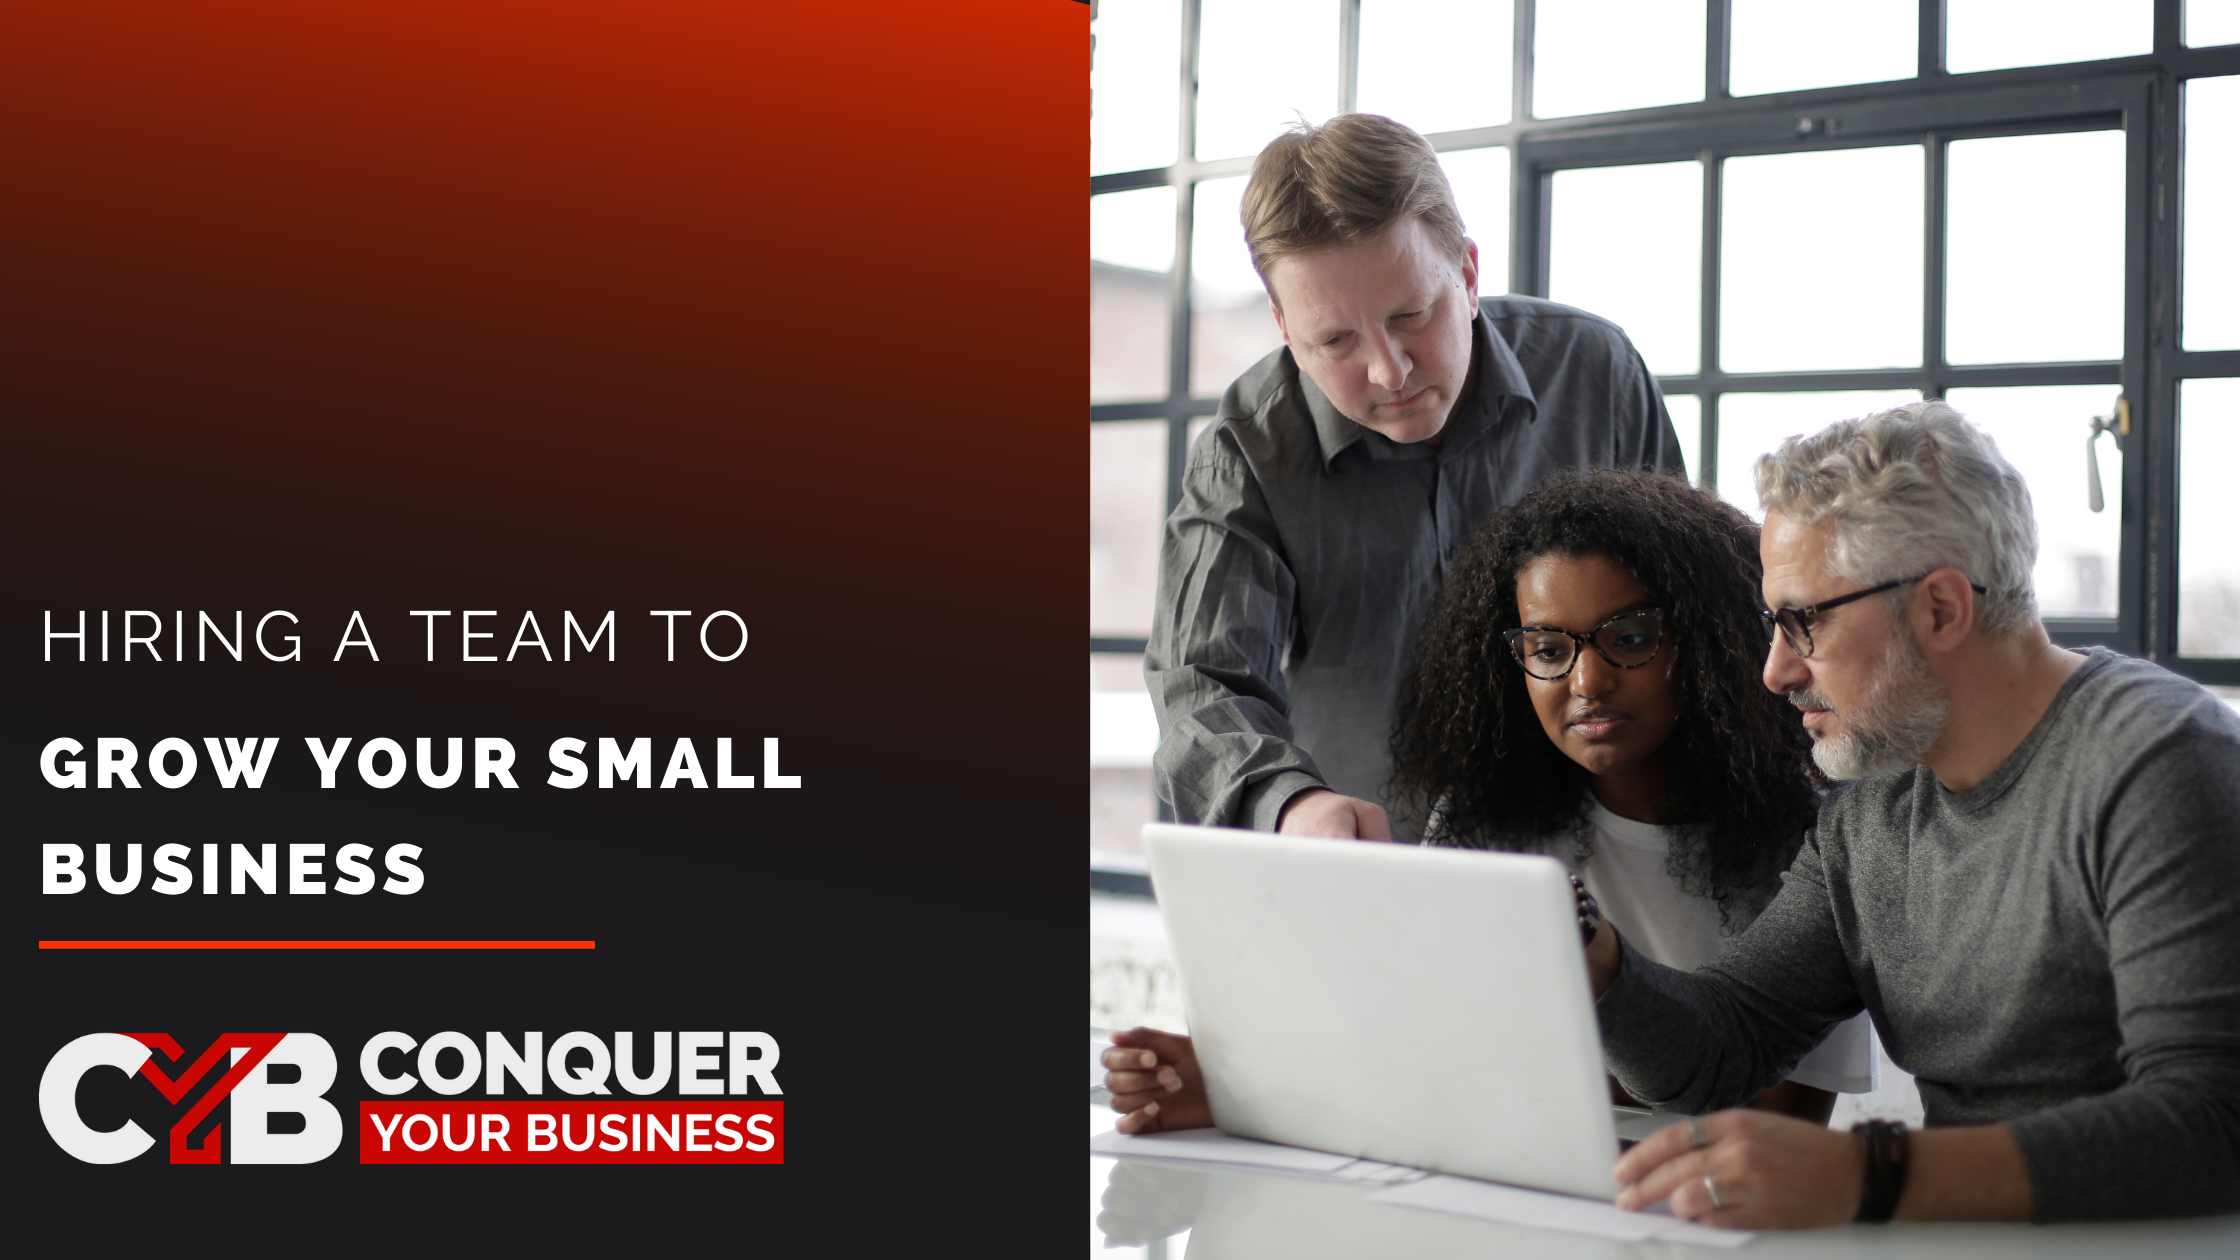 Blog header image, Hiring a Team to Grow Your Small Business, with photo of woman and two men looking at a compter